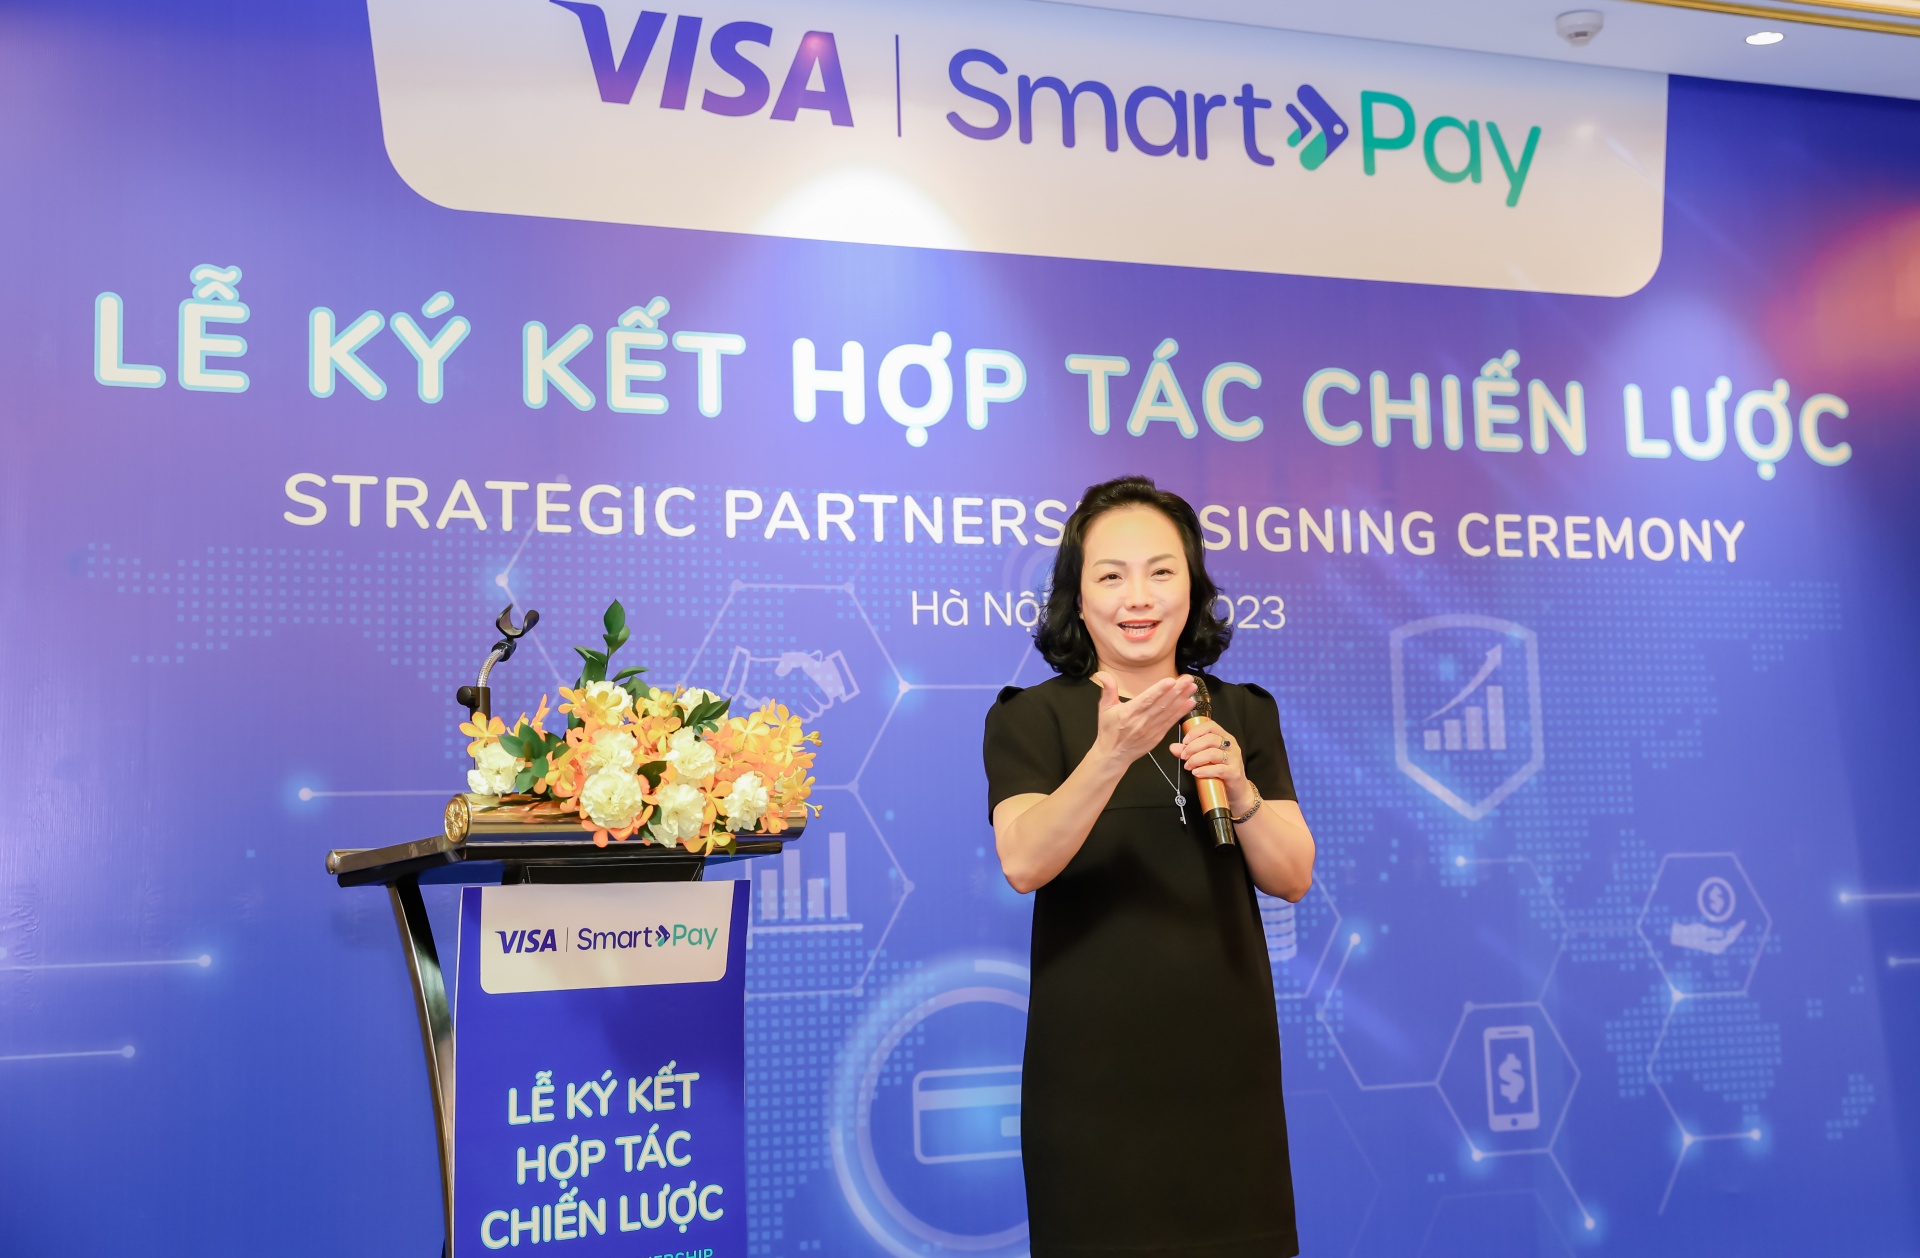 Visa and SmartPay to boost digital payment solutions for MSMEs